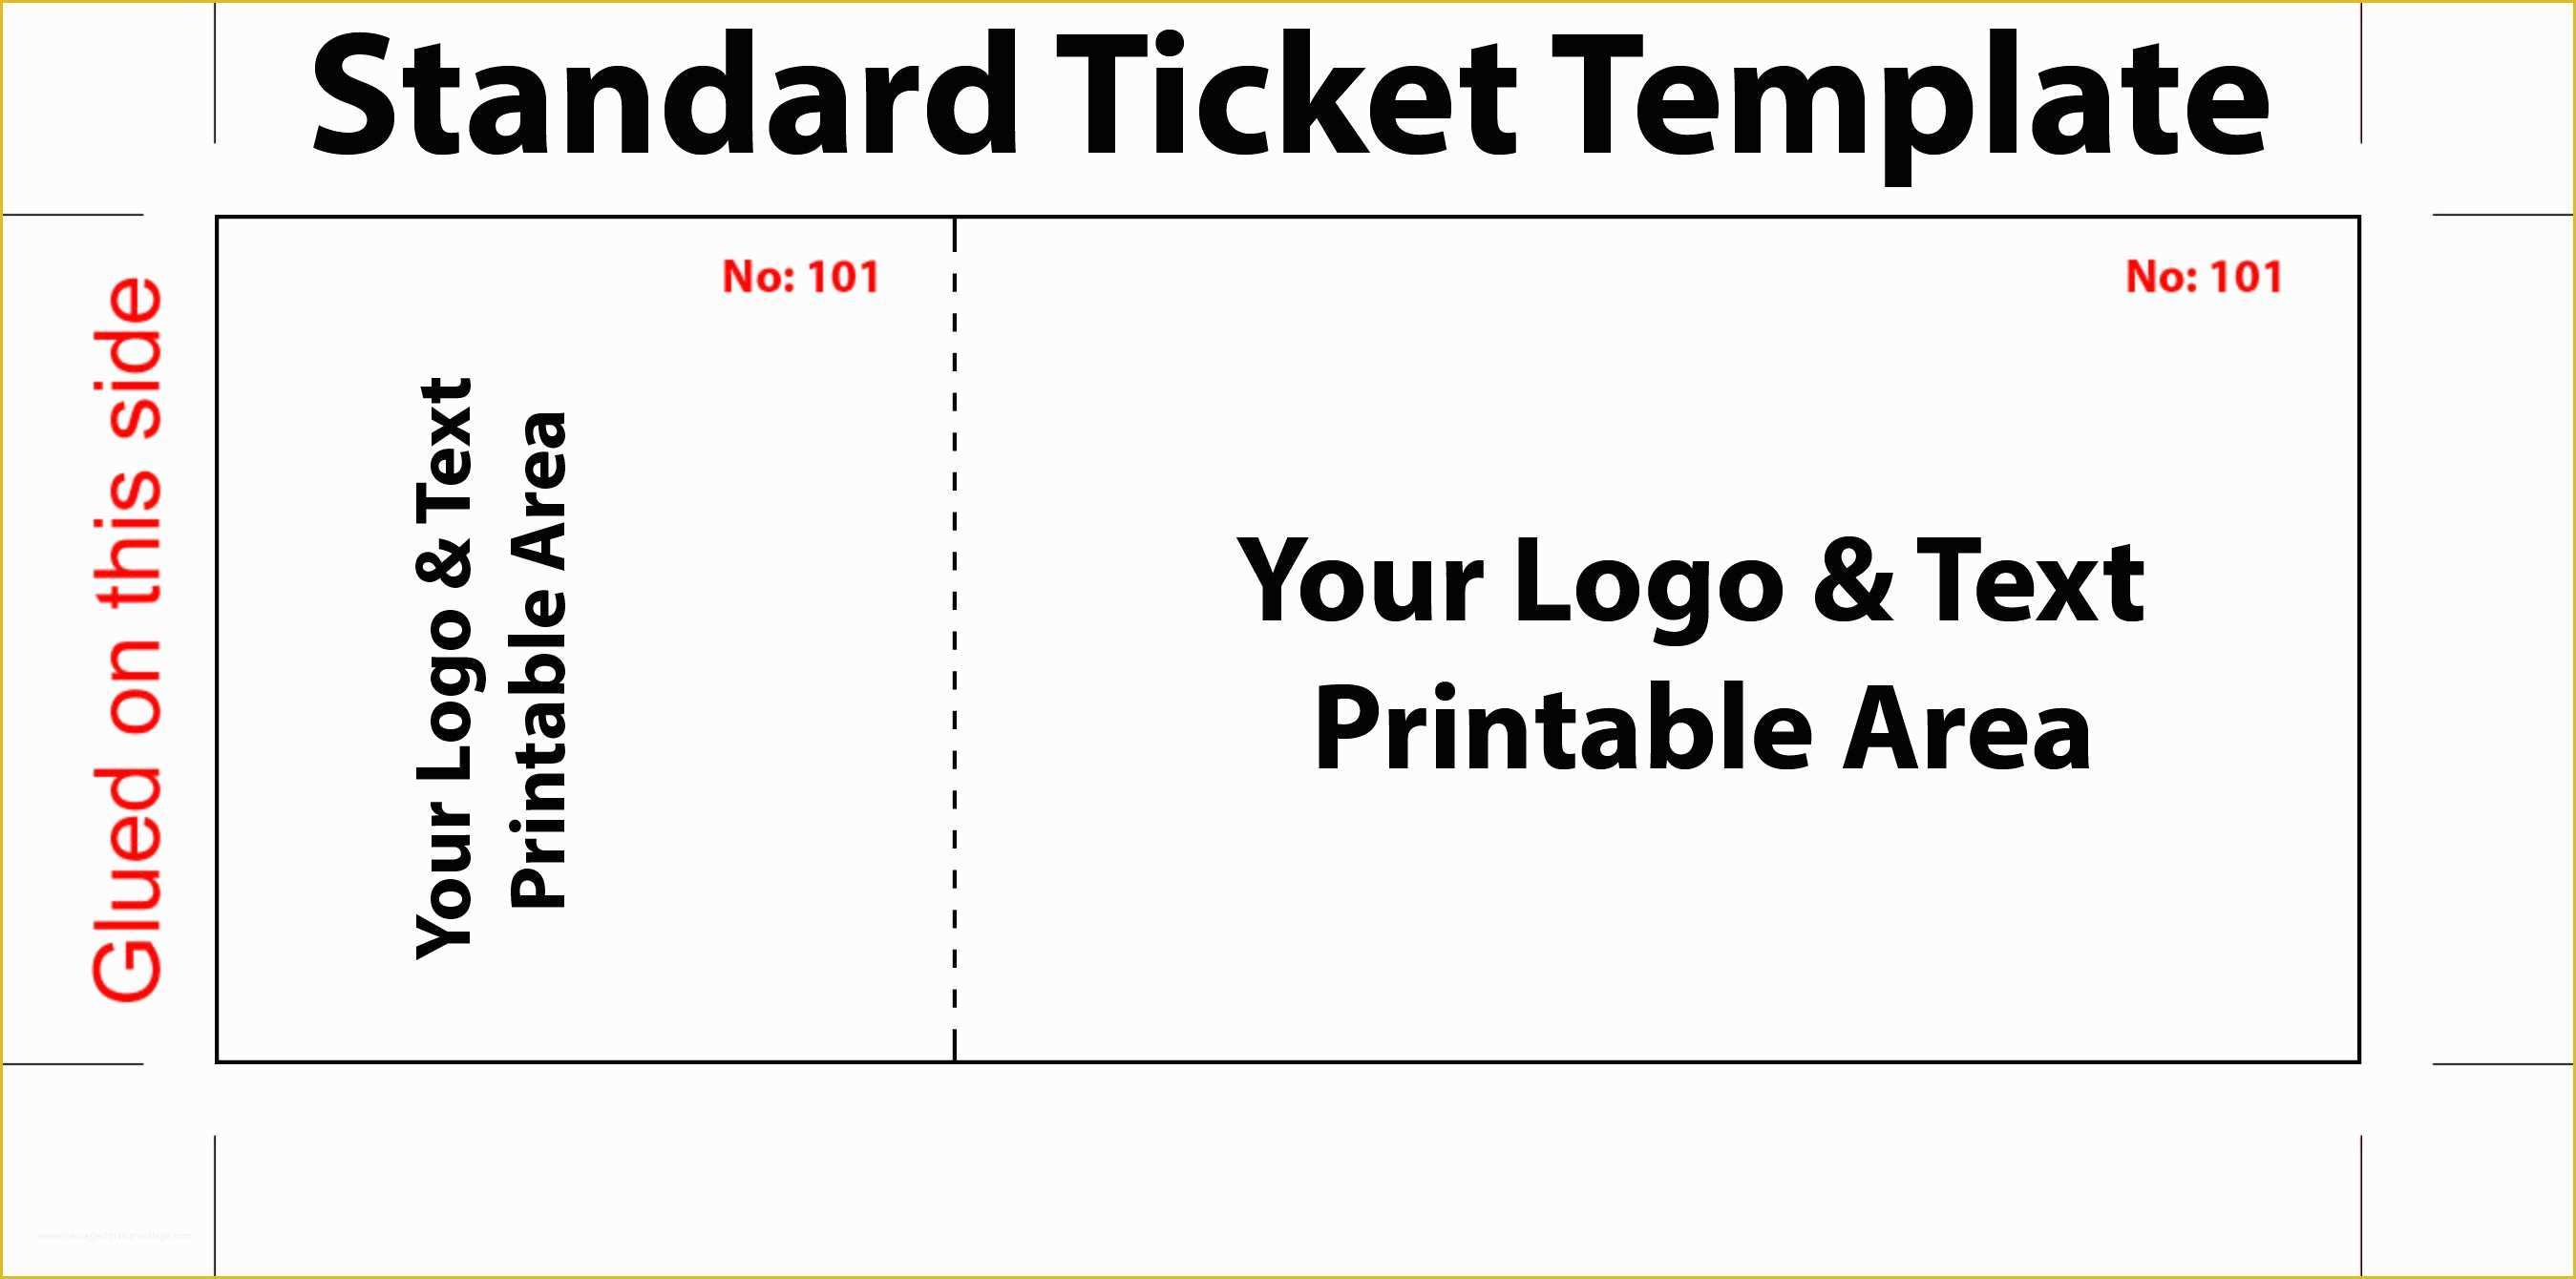 Ticket Template Free Download Of Free Editable Standard Ticket Template Example for Concert